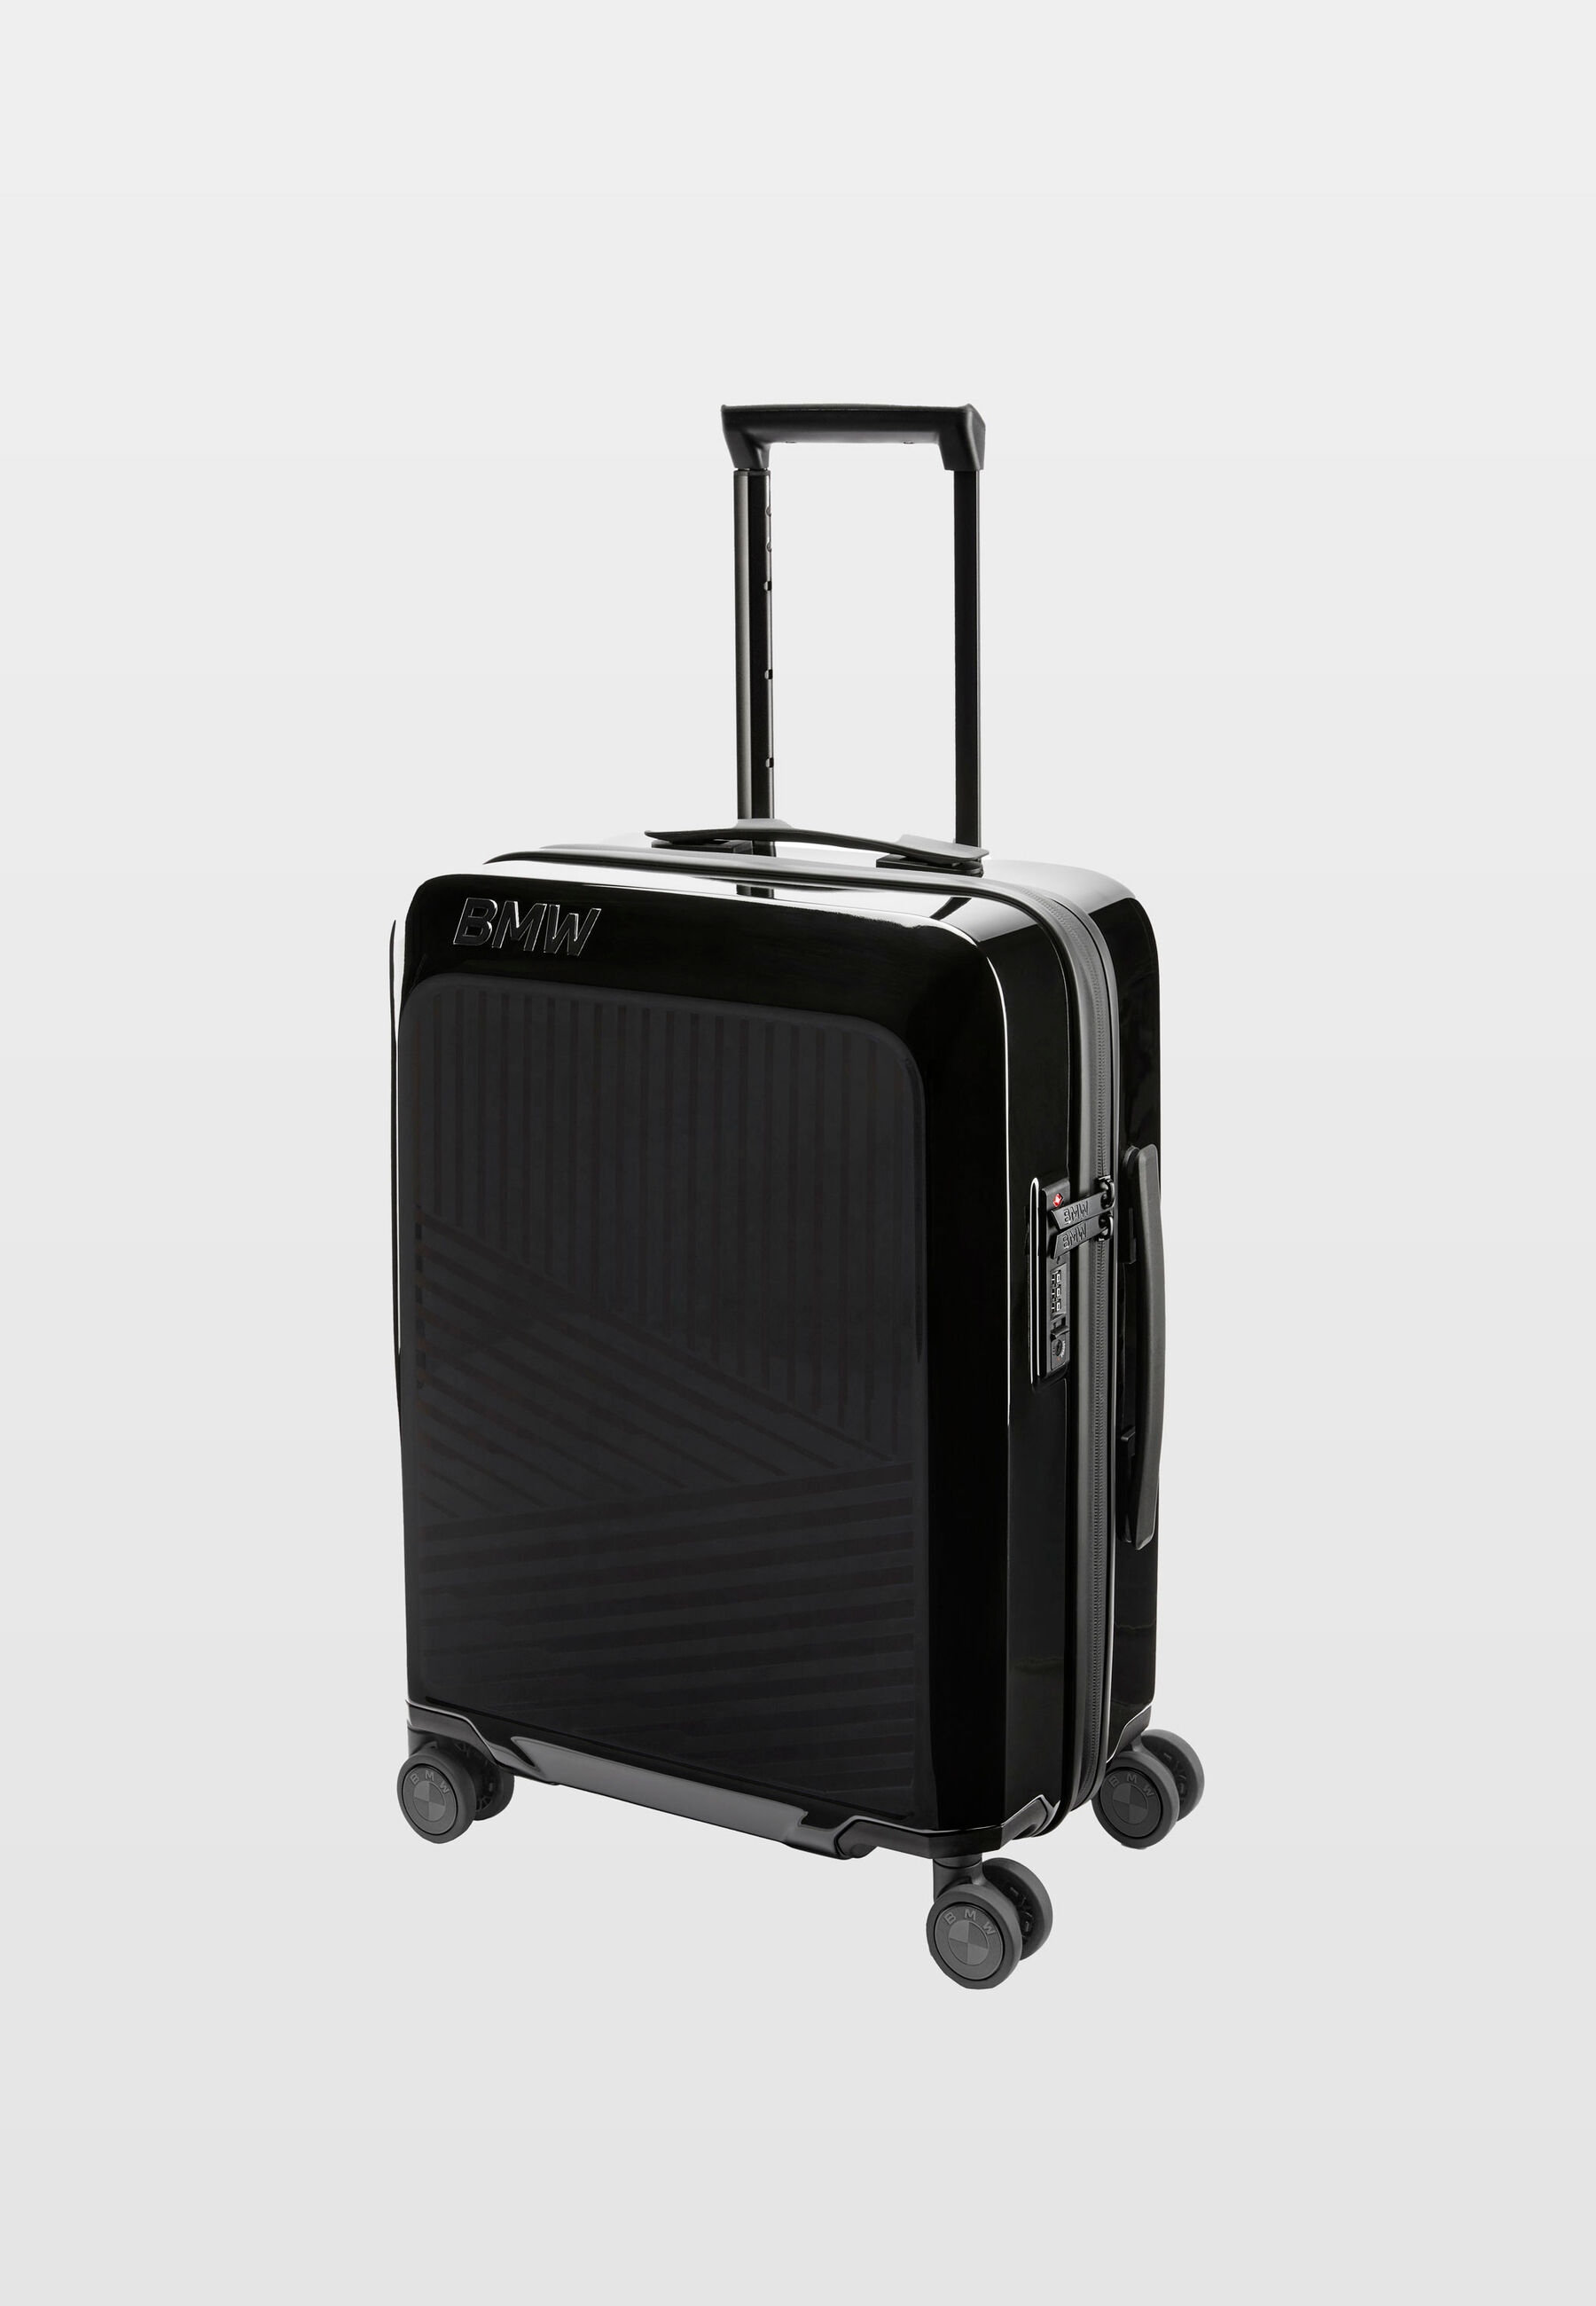 BLCK Square Trolley Luggage Bags - Small Suitcase for Travelling (Black) |  Elegant Auto Retail